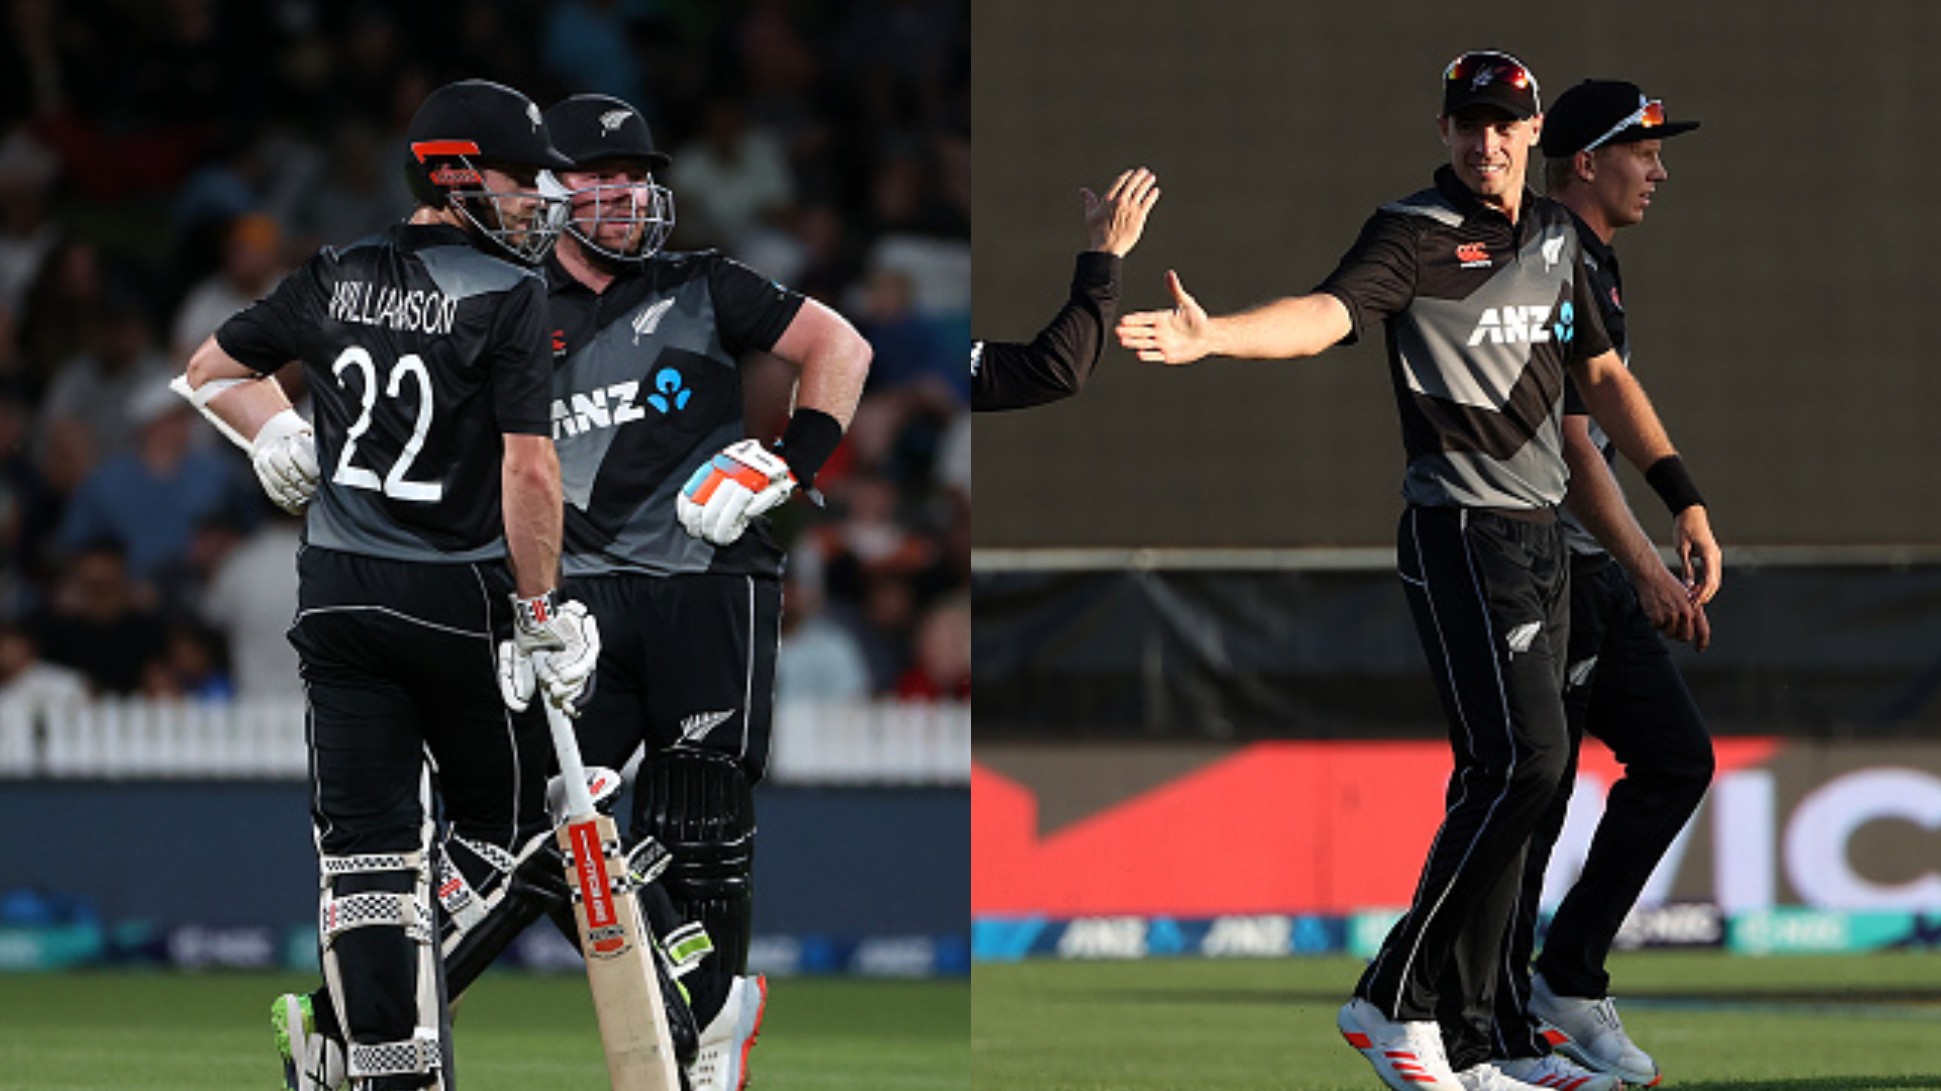 NZ v PAK 2020-21: Southee and Seifert help New Zealand to 9-wicket win over Pakistan, leads T20I series 2-0